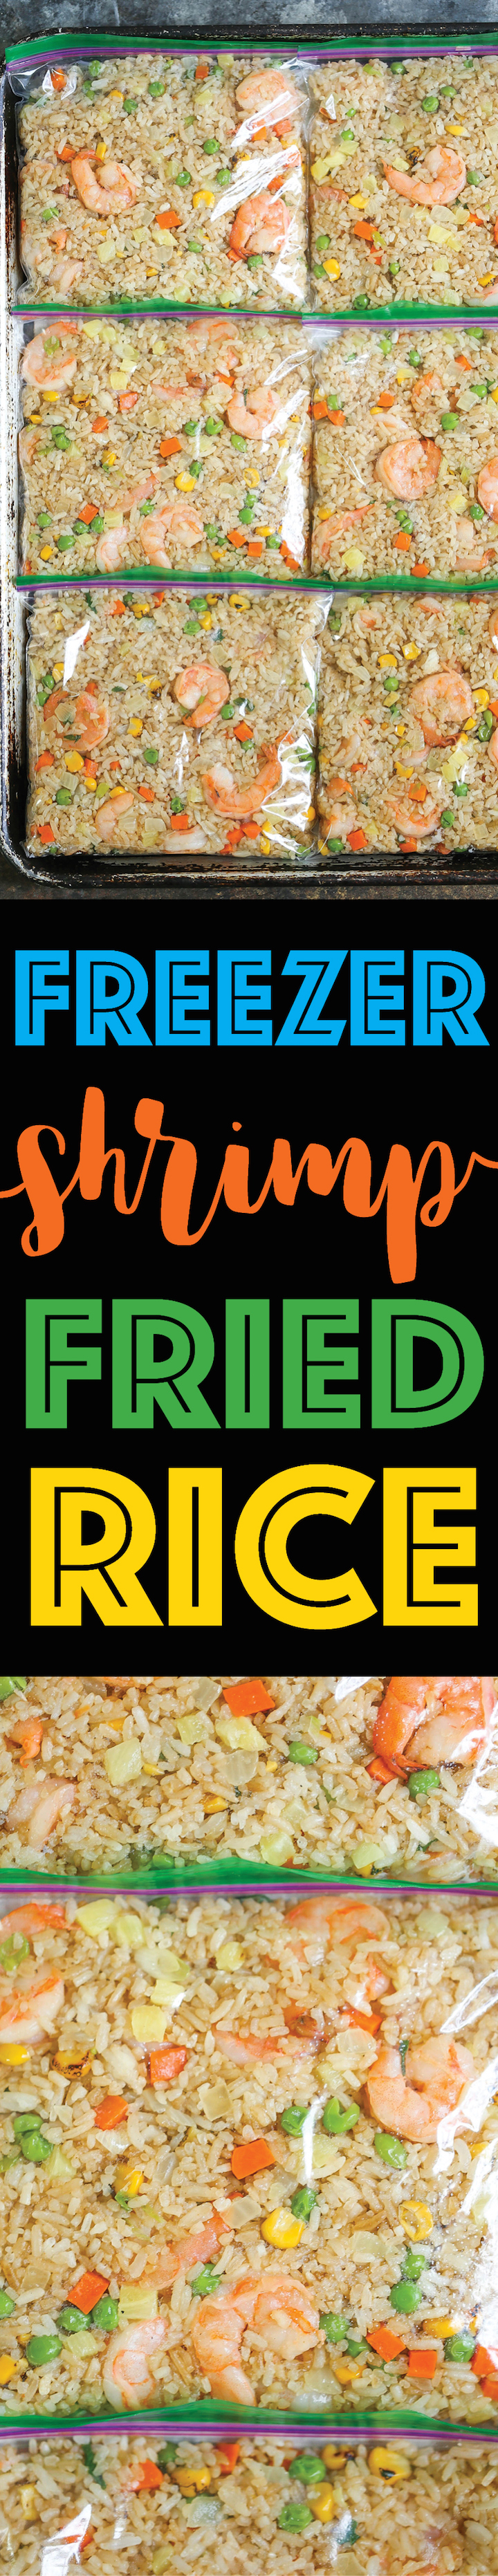 Freezer Shrimp Fried Rice - Yes, you can totally freeze fried rice!!!! Simply freeze, thaw and throw into the skillet for 5-10 minutes. That's it!!!